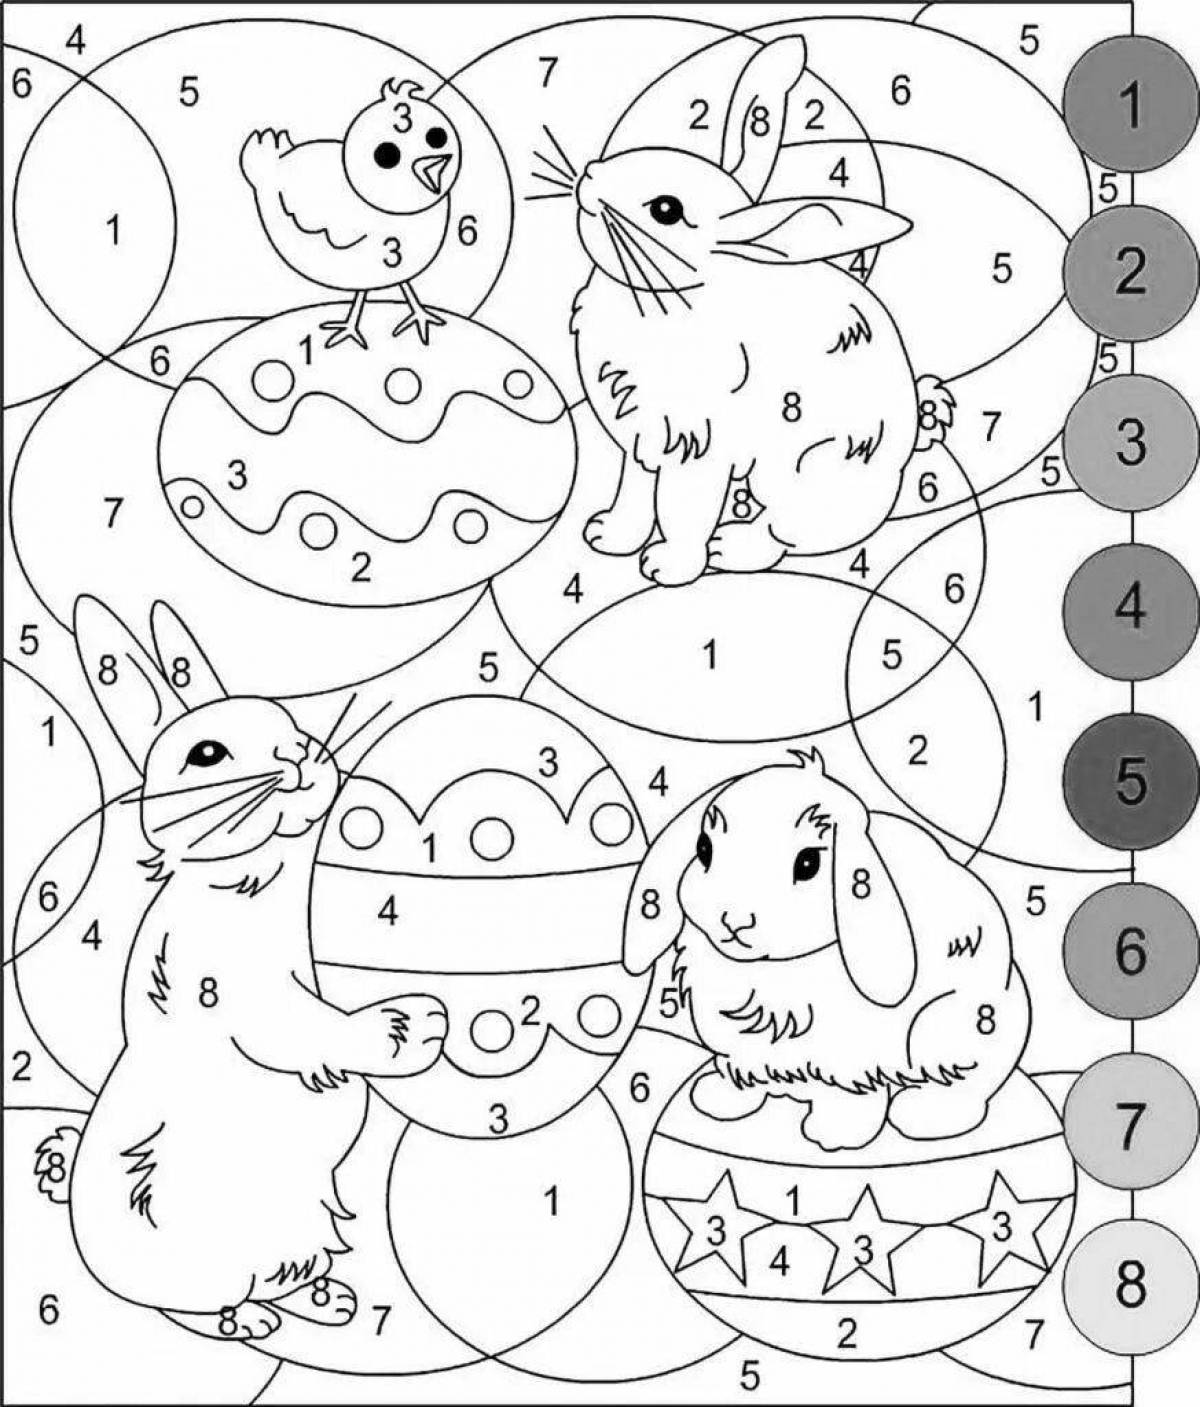 Coloring hare by numbers